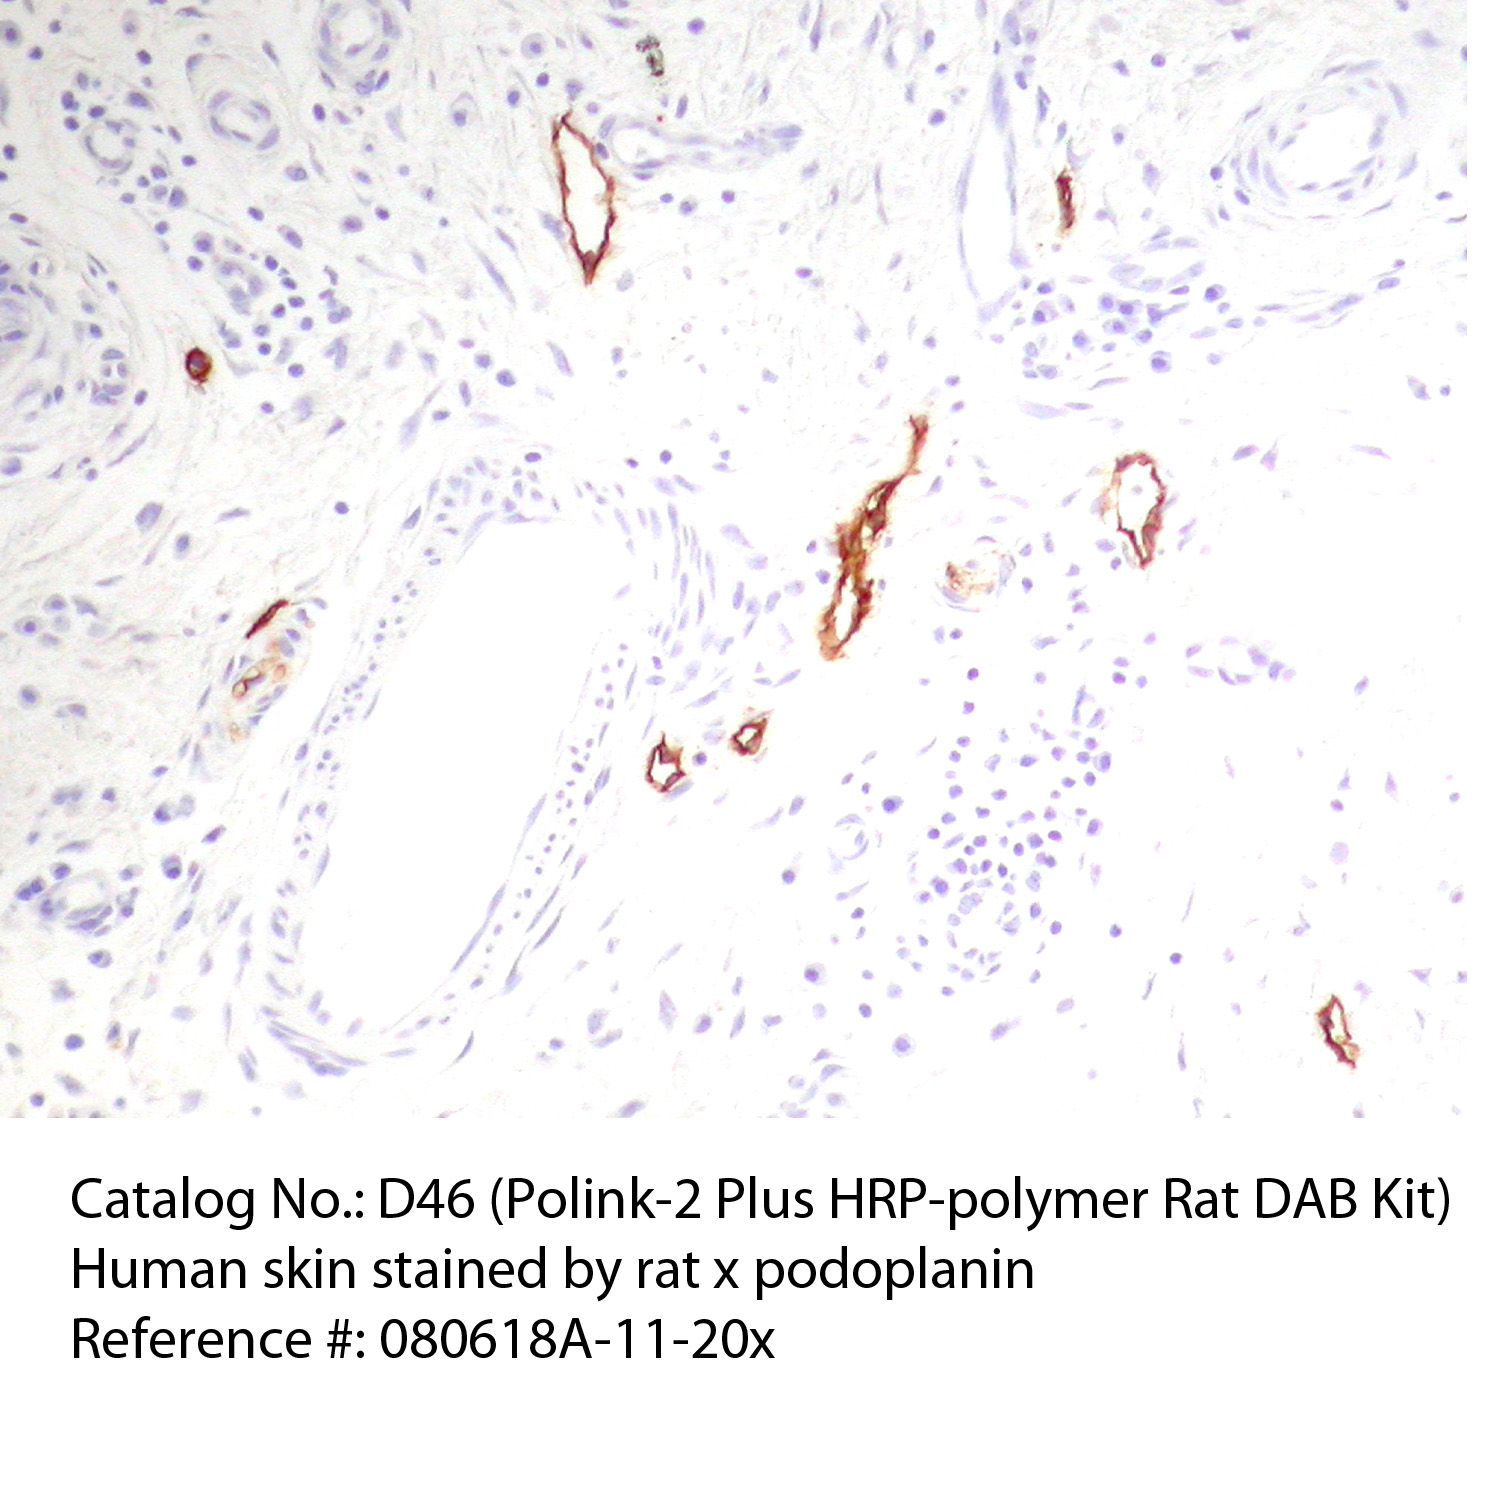 IHC staining of FFPE human skin tissue within normal limits using rat anti-podoplanin polyclonal antibody and Polink-2 Plus HRP Rat NM for DAB detection kit [D46-18]. The brown stain indicates positive stain and blue is the counter stain. It is mounted using a permanent organic mounting medium [E37-100].